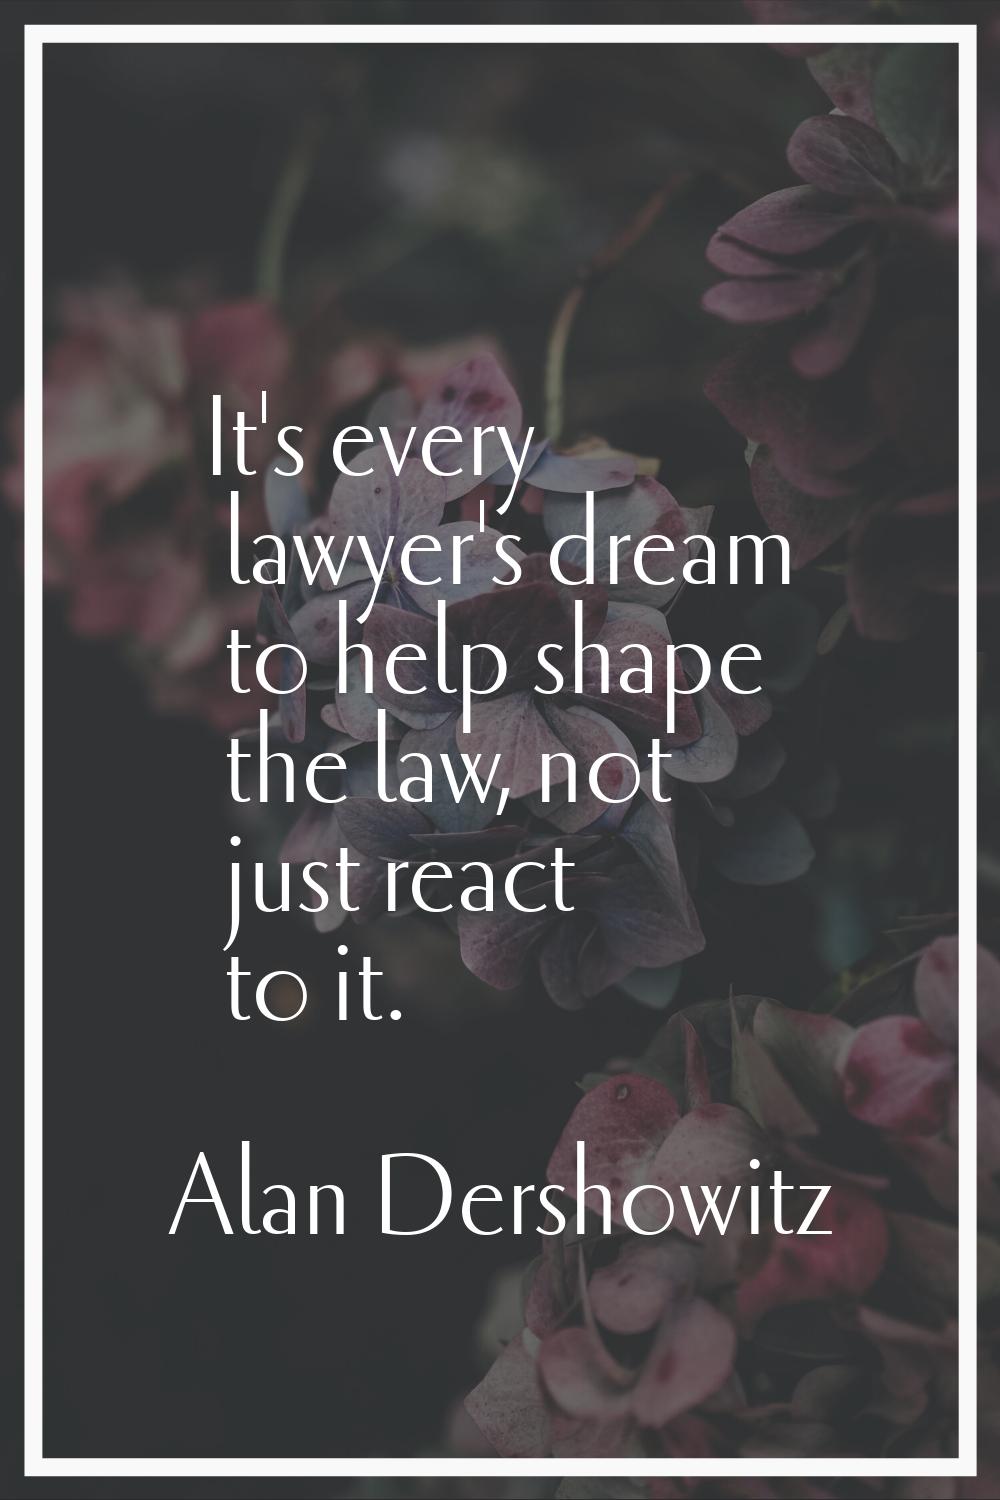 It's every lawyer's dream to help shape the law, not just react to it.